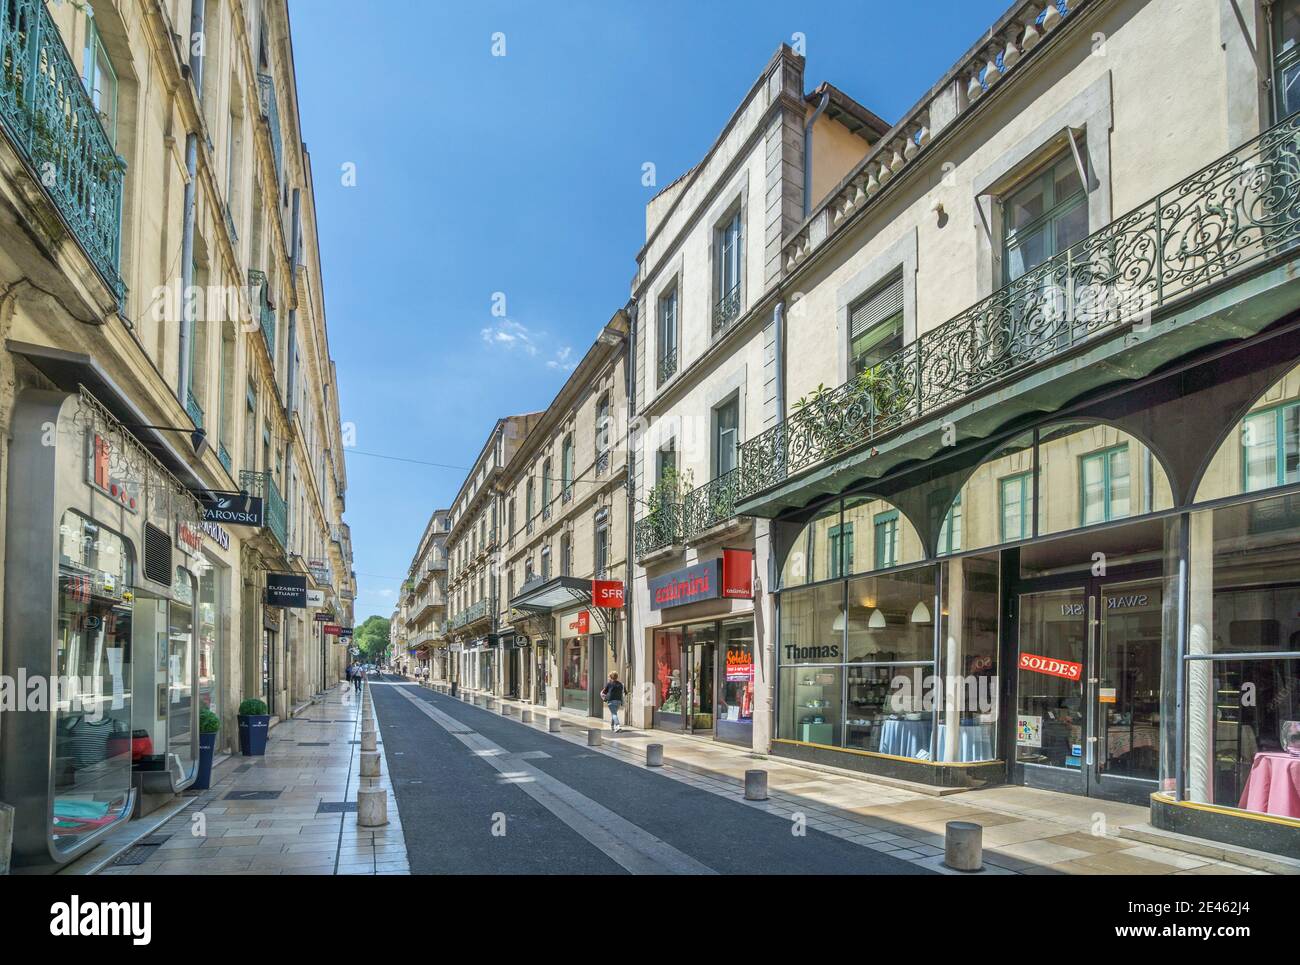 shops and botiques at Avenue du Général Perrier in the centre of Nimes, Gard department, Occitanie region, Southern France Stock Photo